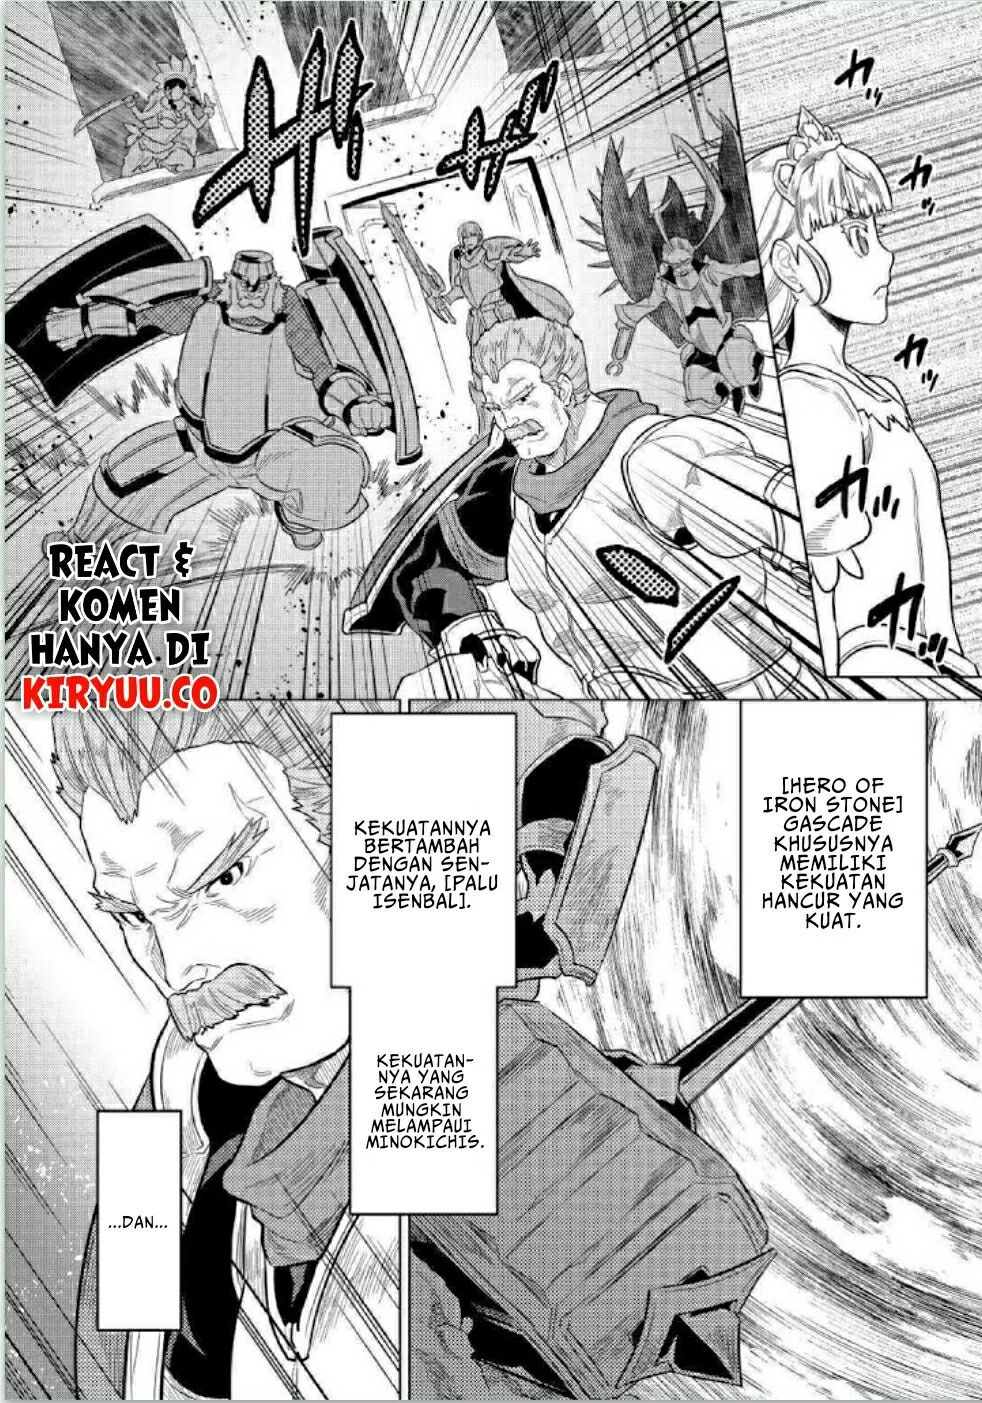 Re Monster Chapter 69